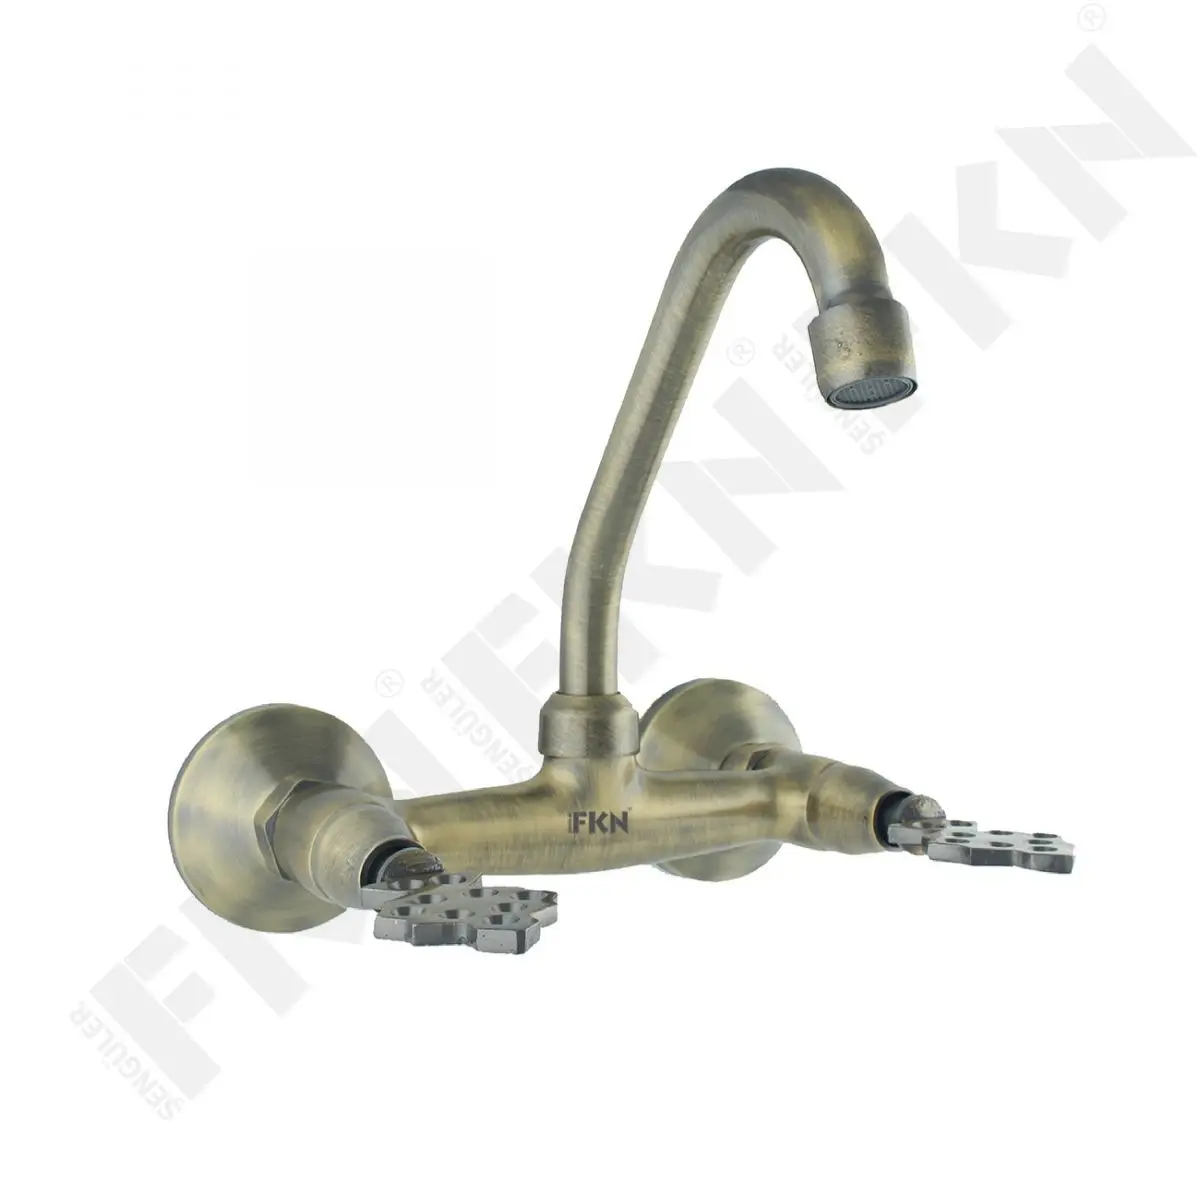 

FKN Solid Brass Bathroom Faucet Traditional Gold Dual Holder Single Hole Basin Mixer Wall Mounted Hot And Cold Water Bathrooms Tap - FKN01039805